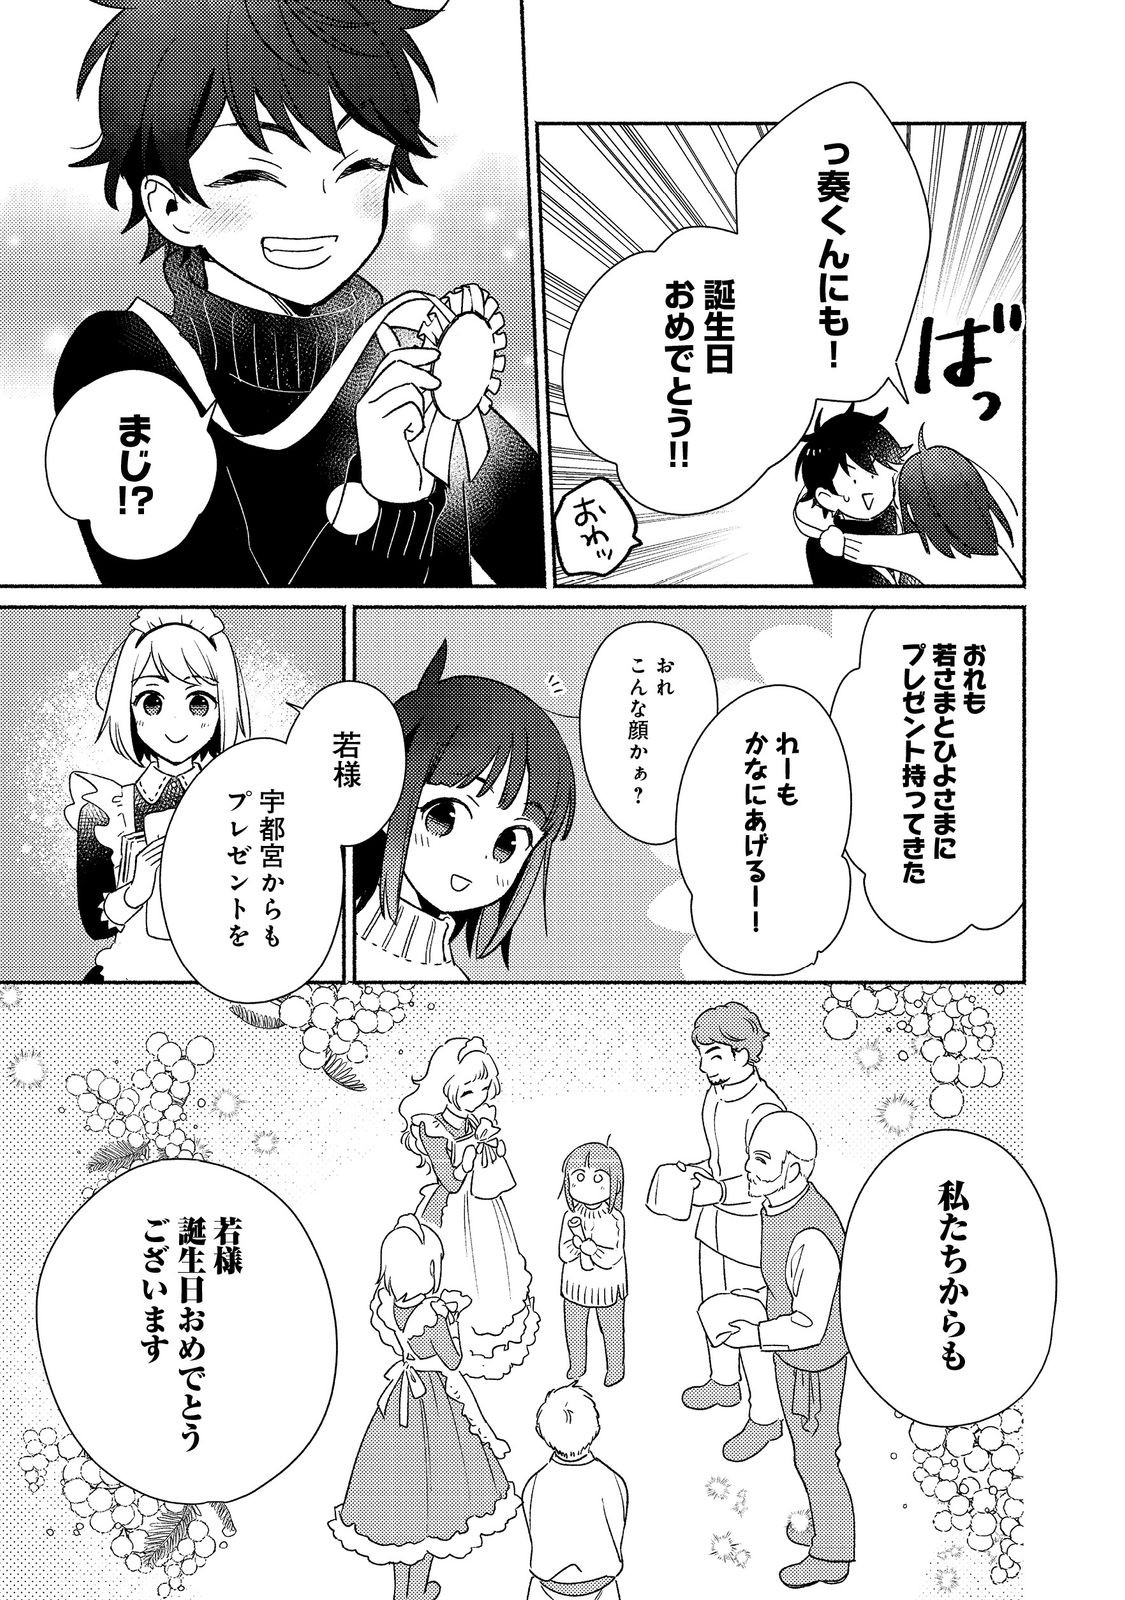 I’m the White Pig Nobleman 第26.1話 - Page 11